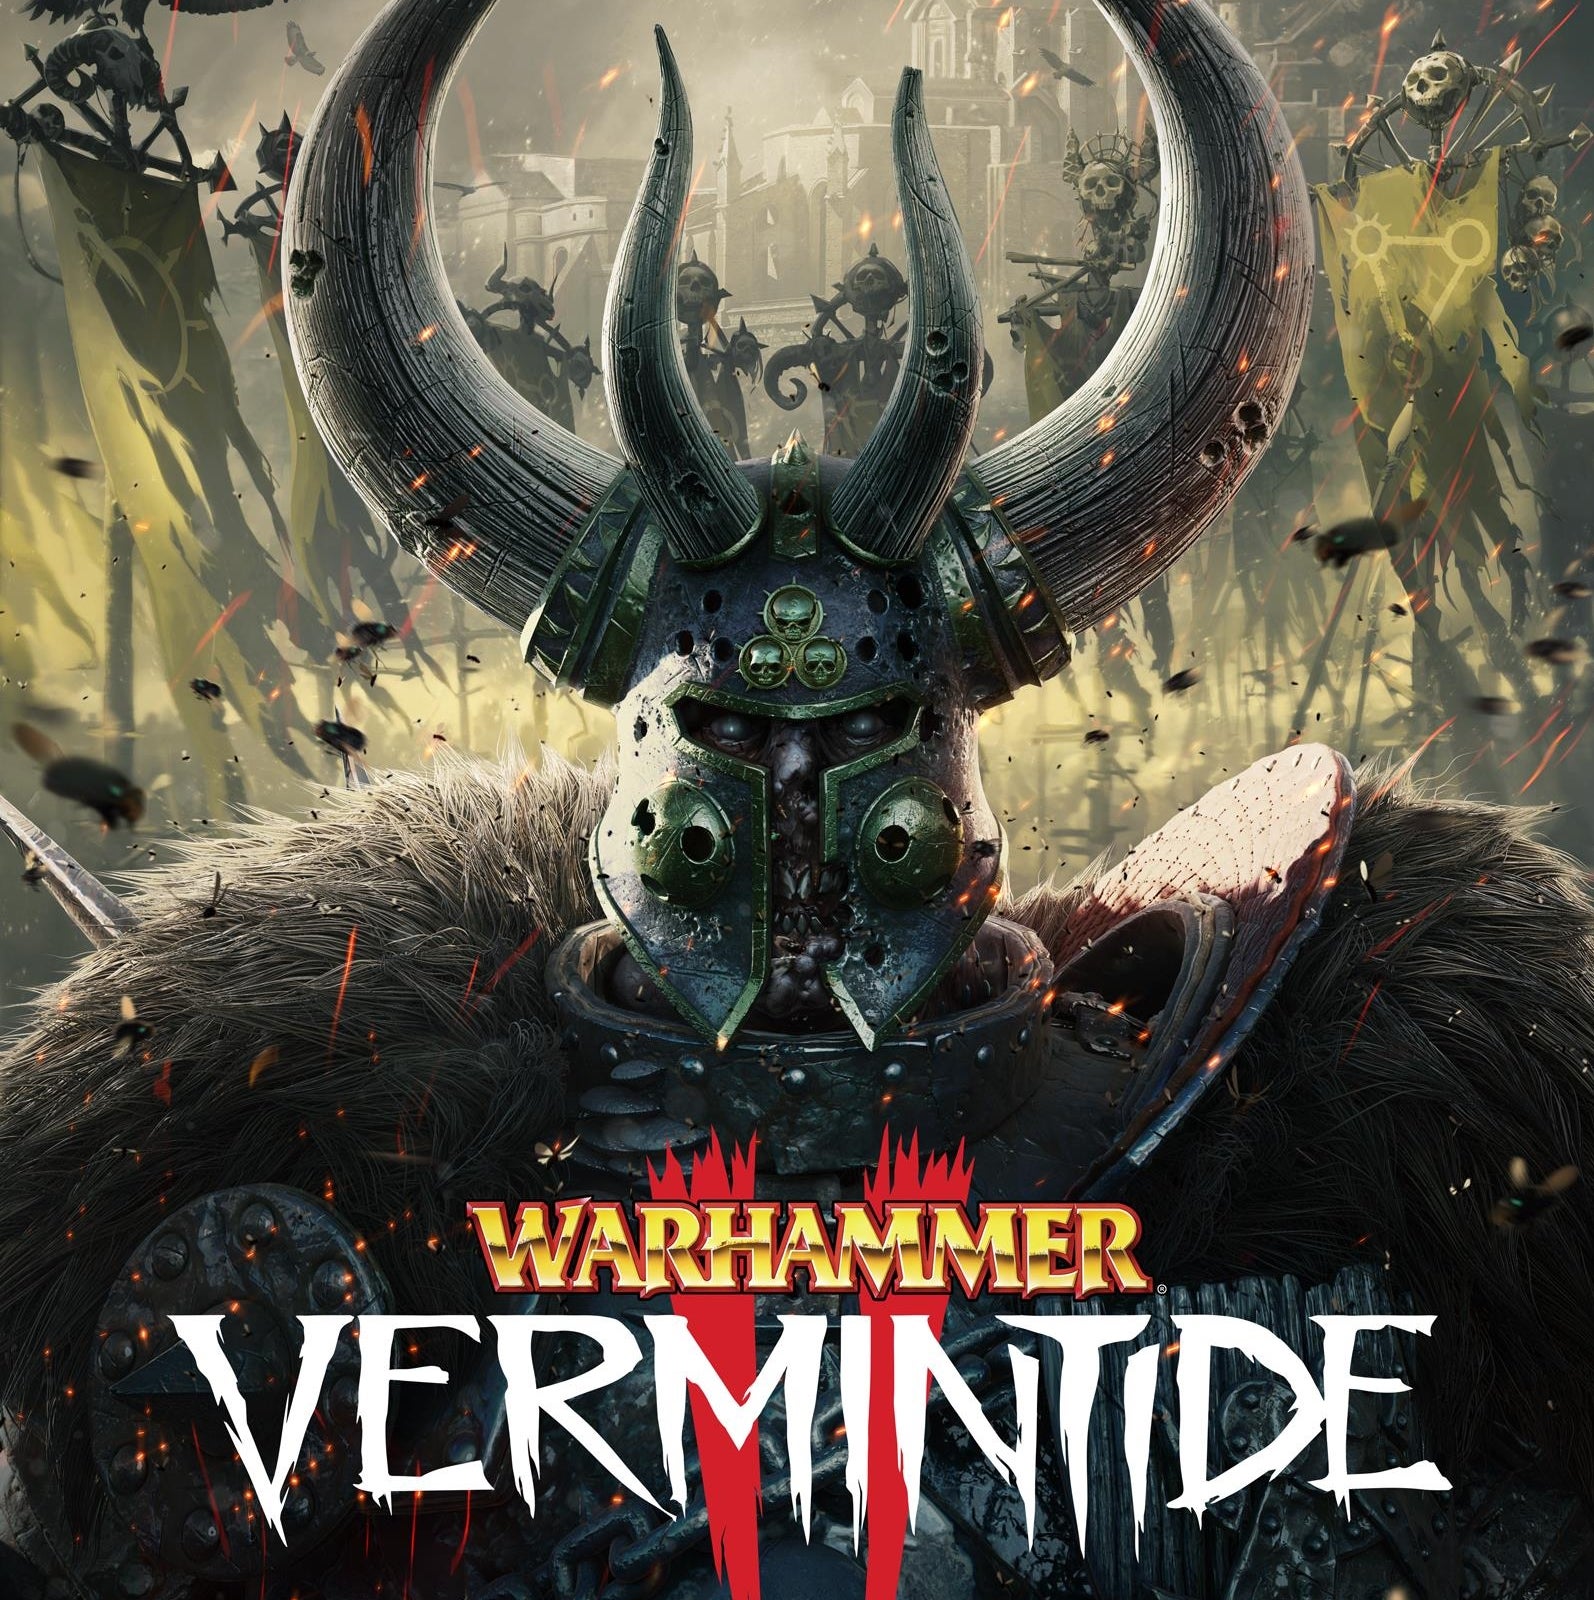 Image for Warhammer: Vermintide 2 pre-order beta now live alongside new gameplay trailer